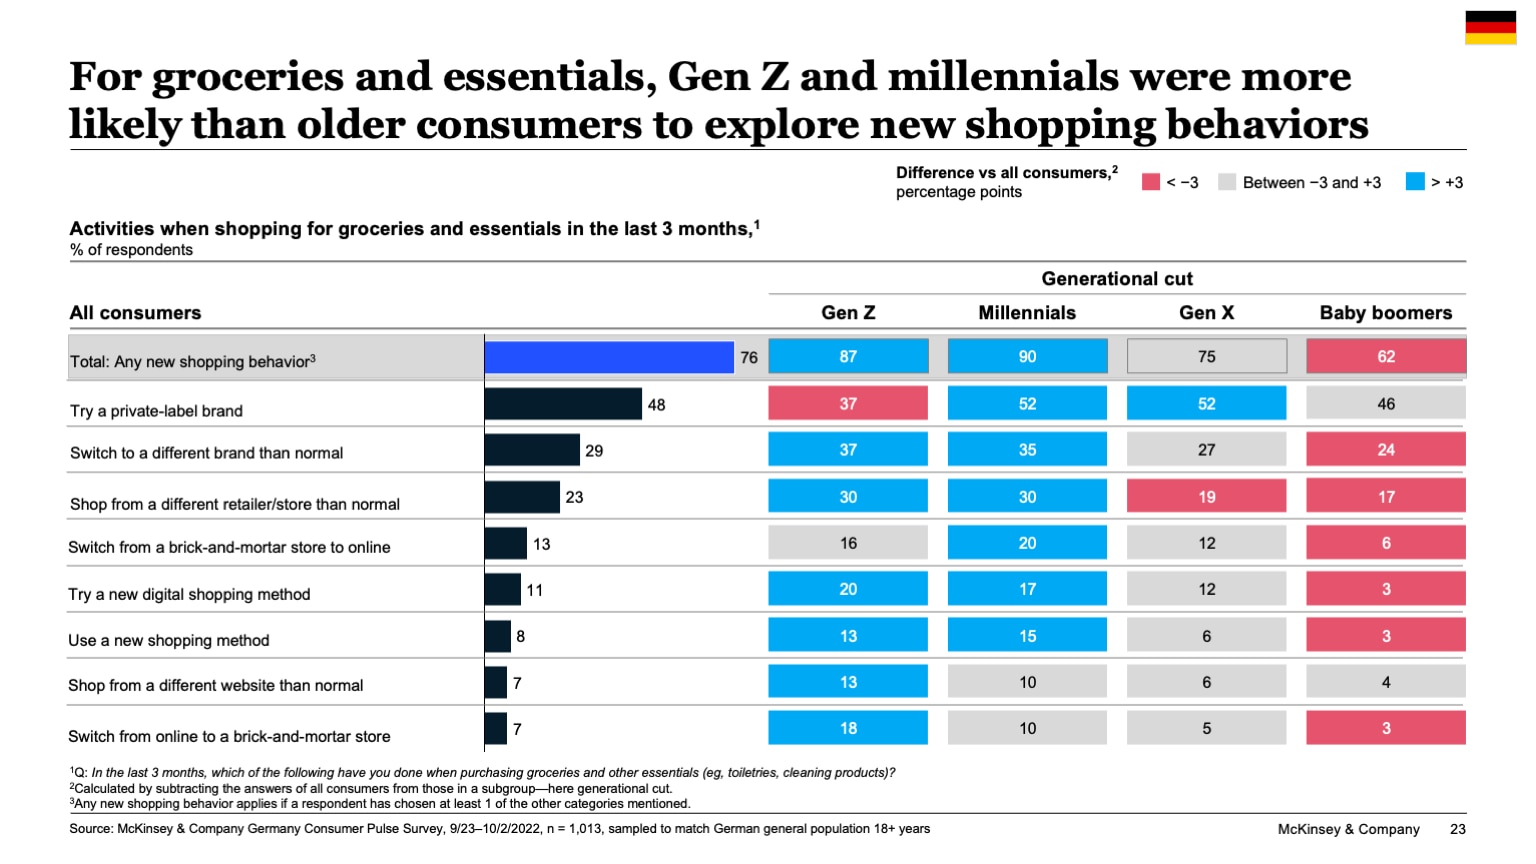 For groceries and essentials, Gen Z and millennials were more likely than older consumers to explore new shopping behaviors